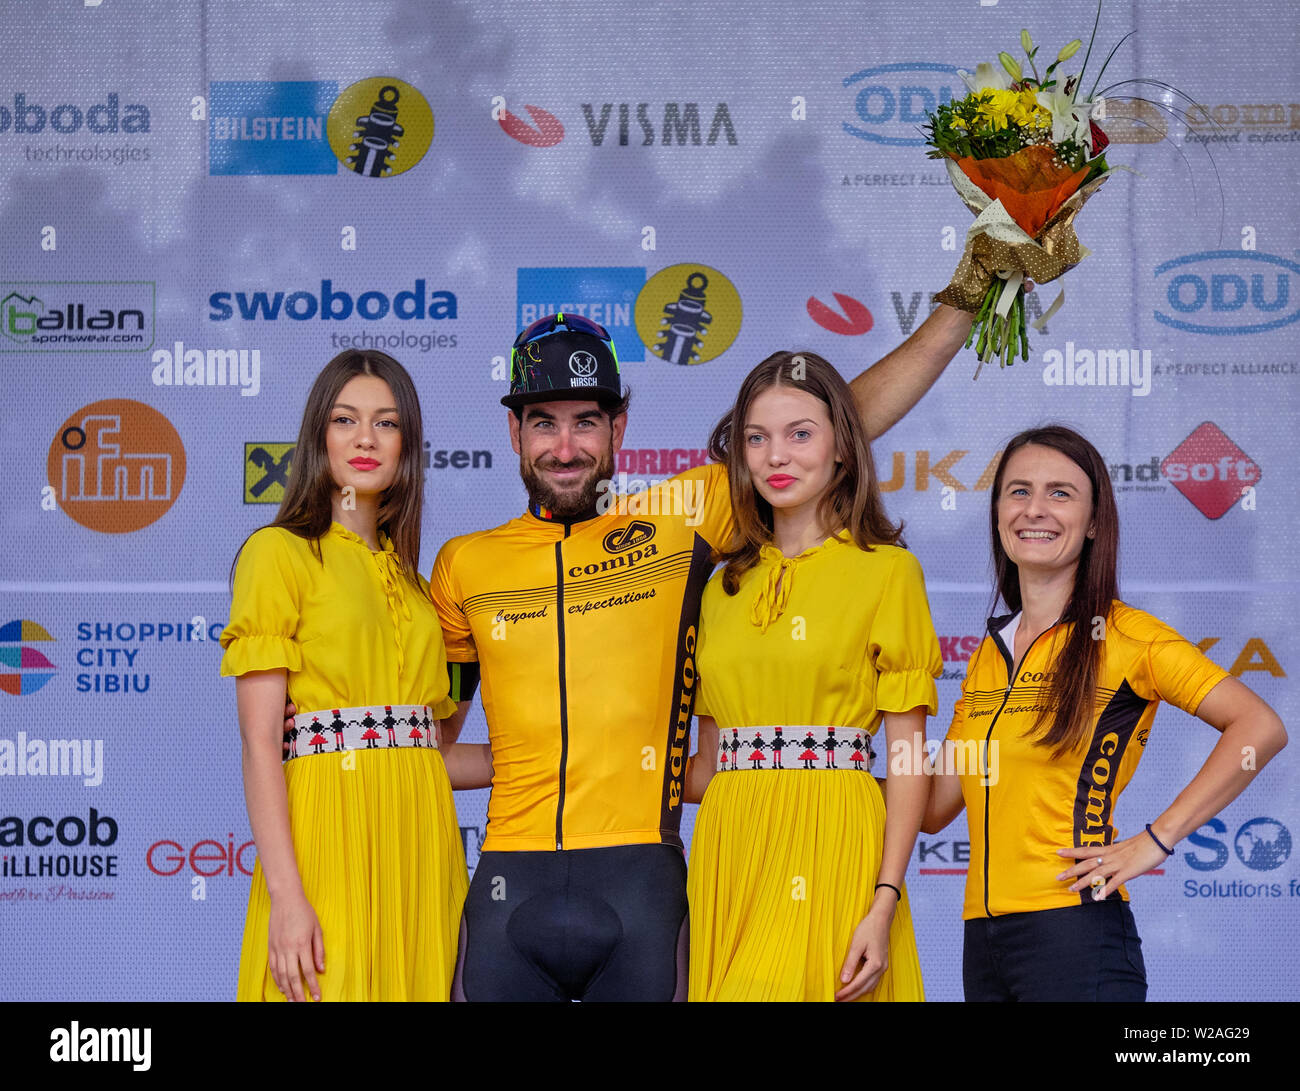 Award ceremony of Cyclist Riccardo Stacchiotti (Team Giotti Victoria– Palomar) winner of the 4th stage of the Sibiu Cycling Tour, Romania, July 7,2019 Stock Photo